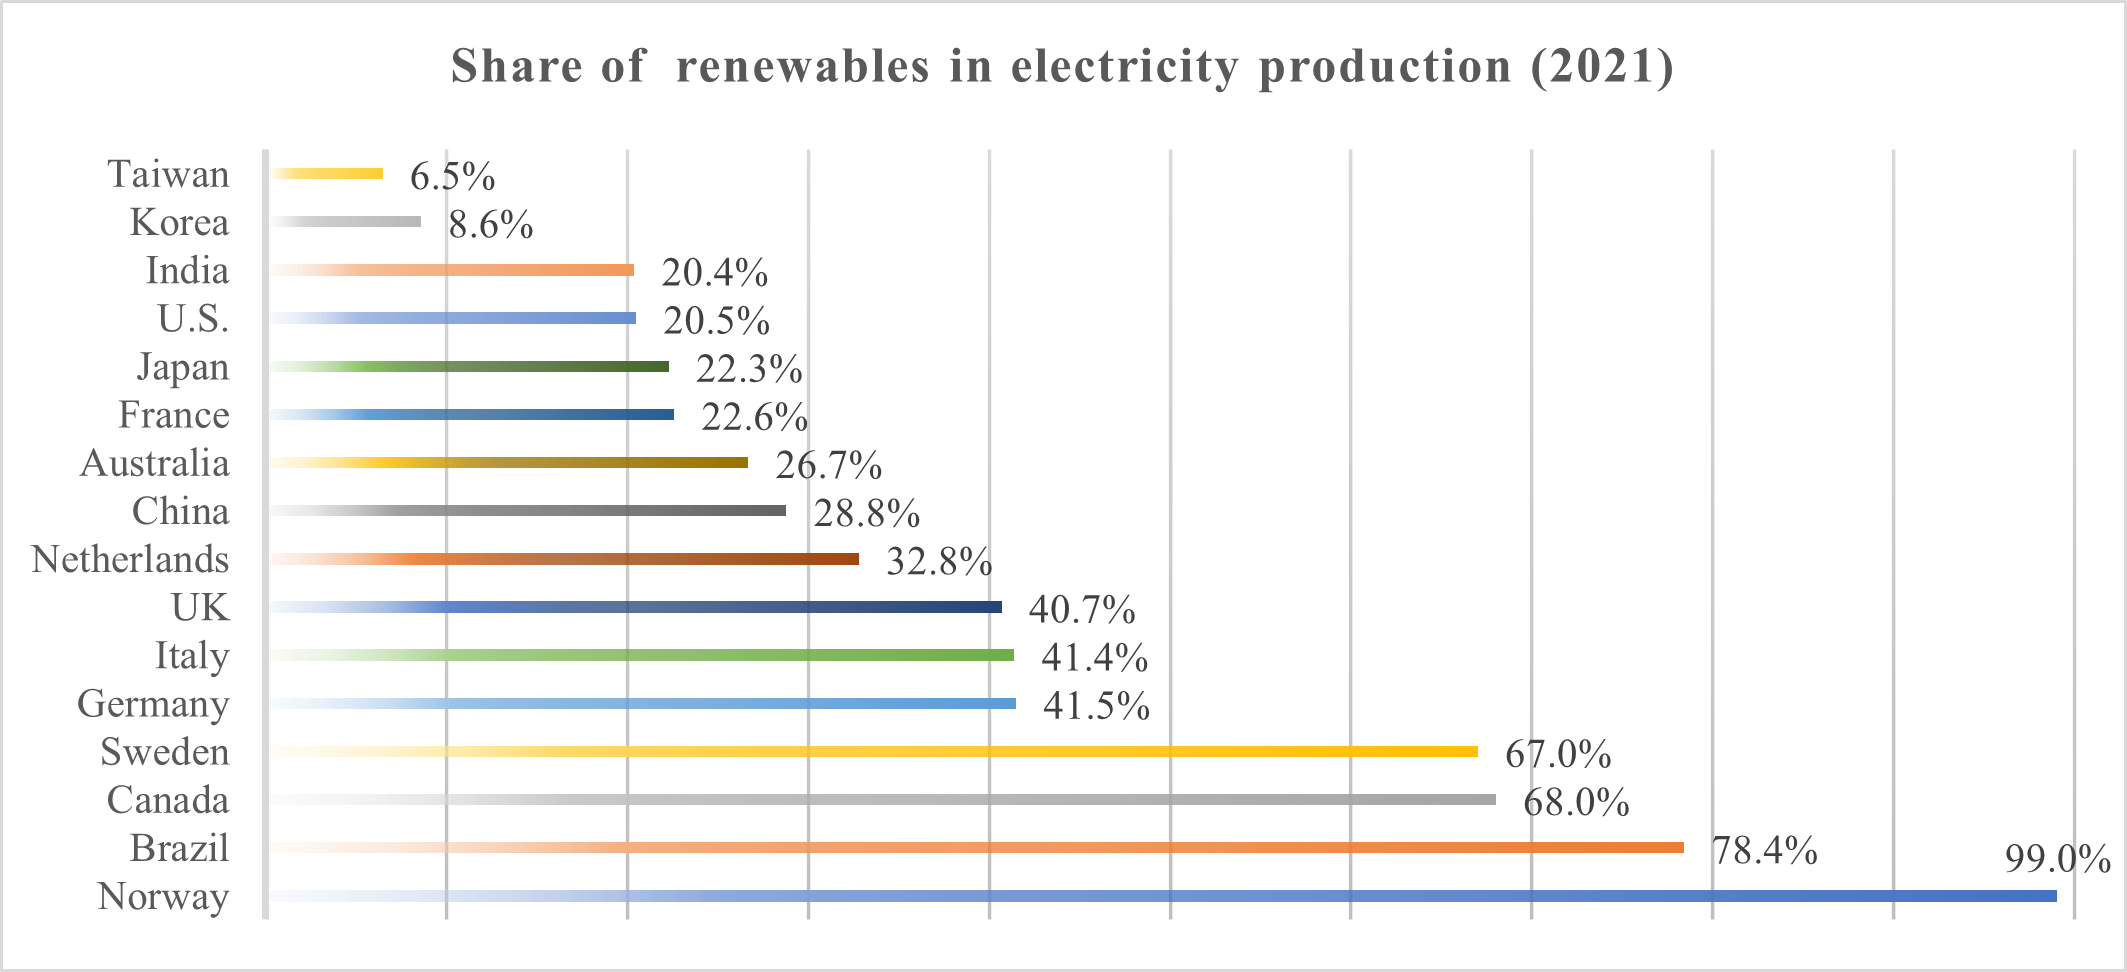 Korea: Share of  renewables in electricity production (2021)